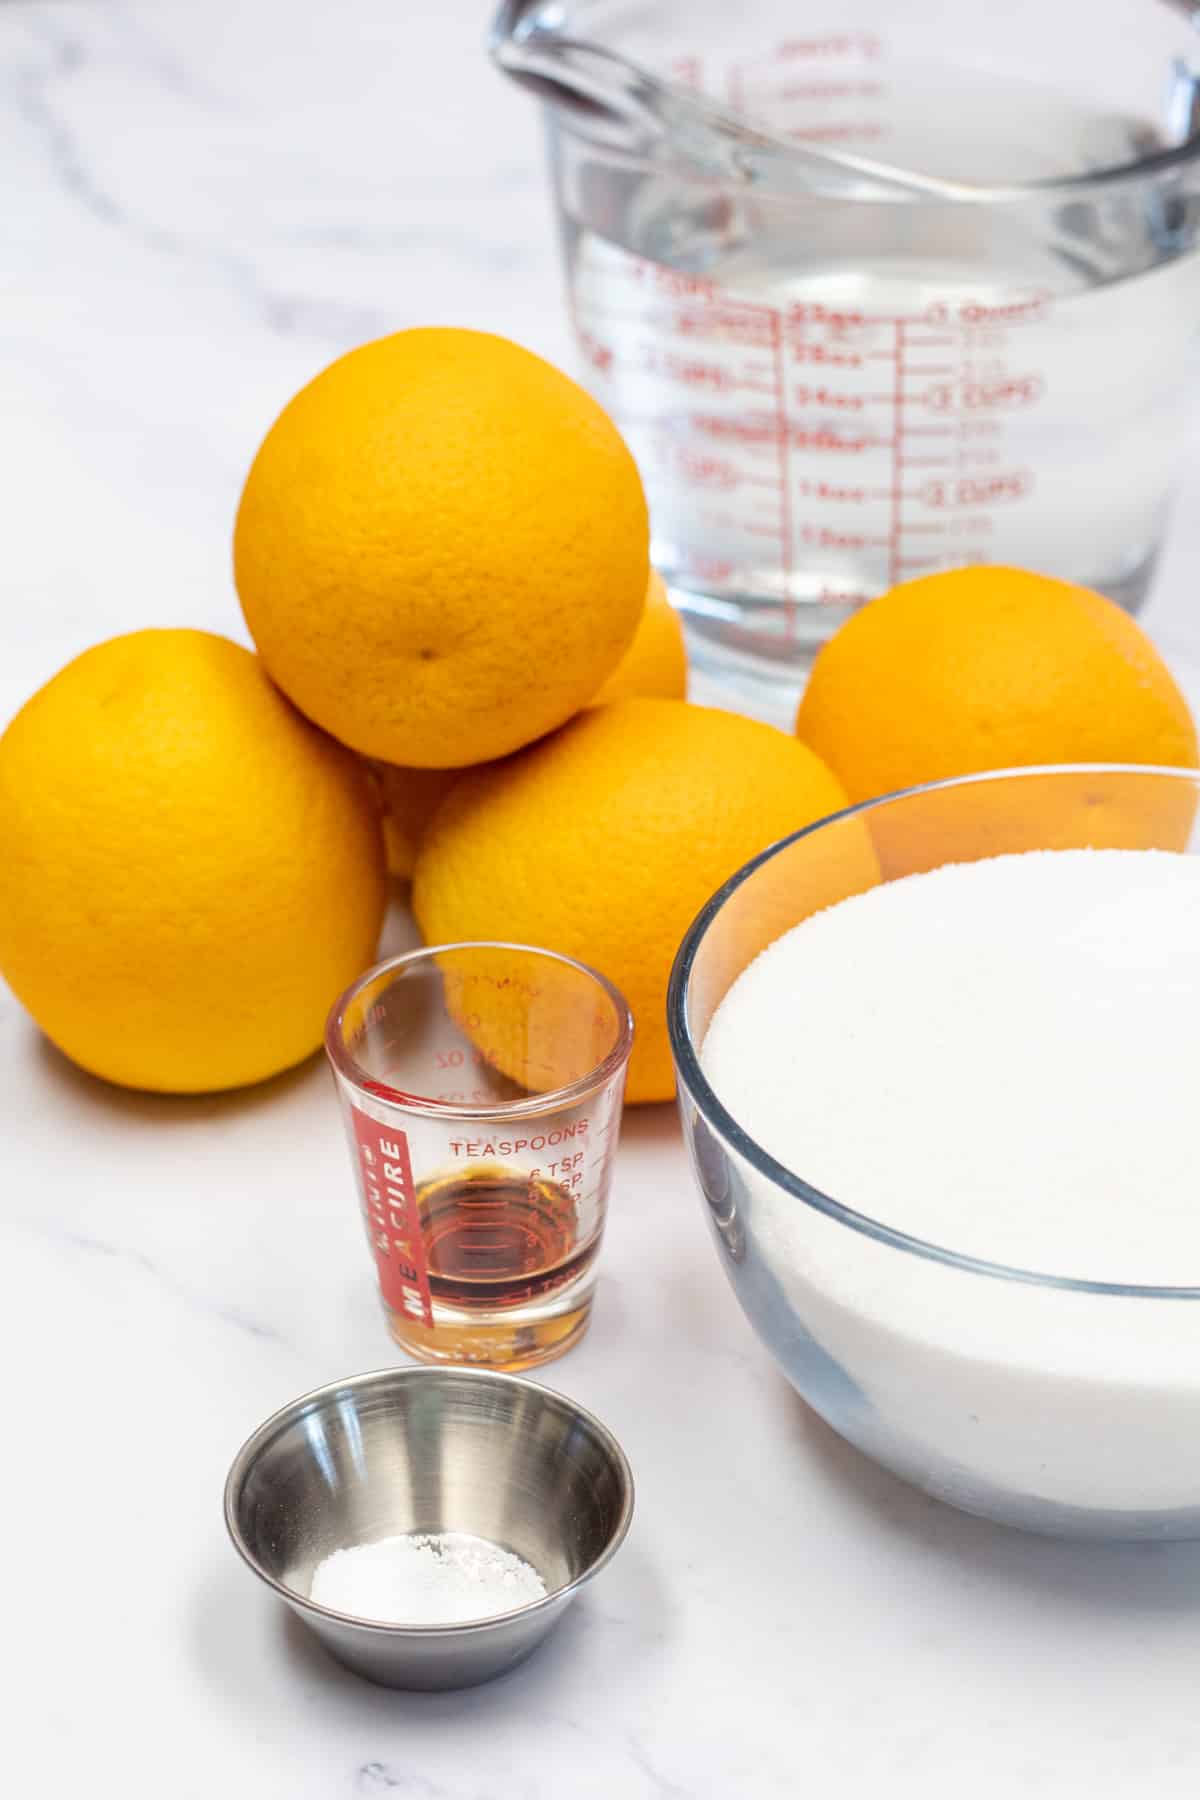 Photo showing ingredients needed for candied oranges.